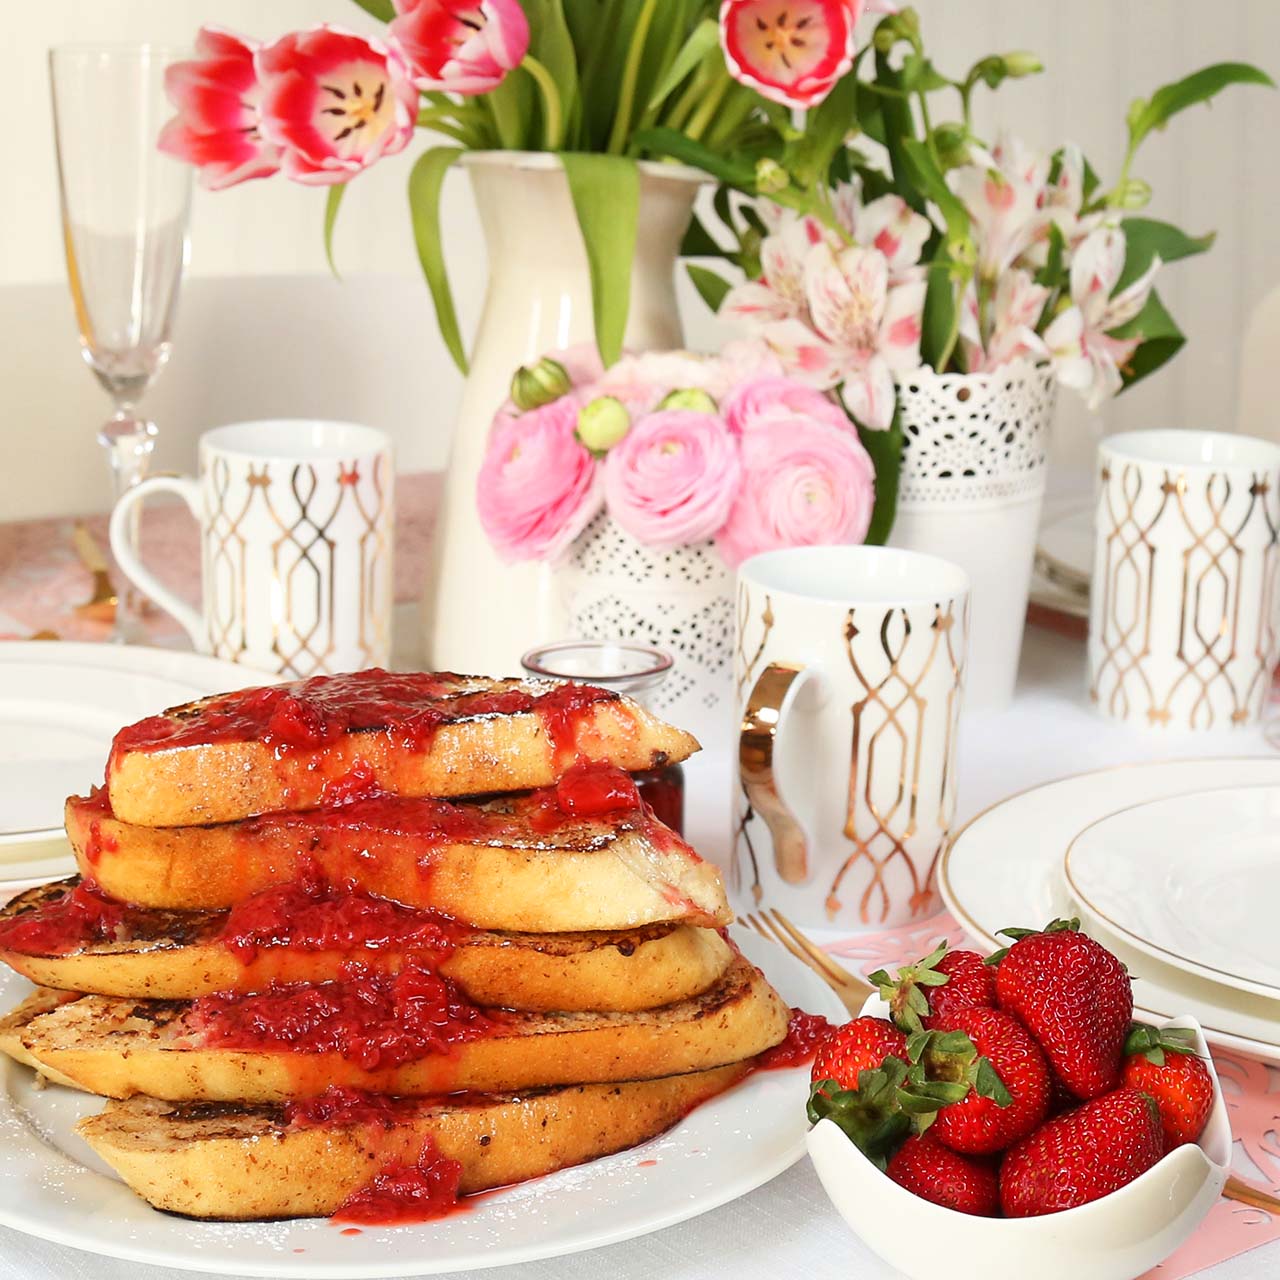 Vegan French Toast with Strawberry Sauce